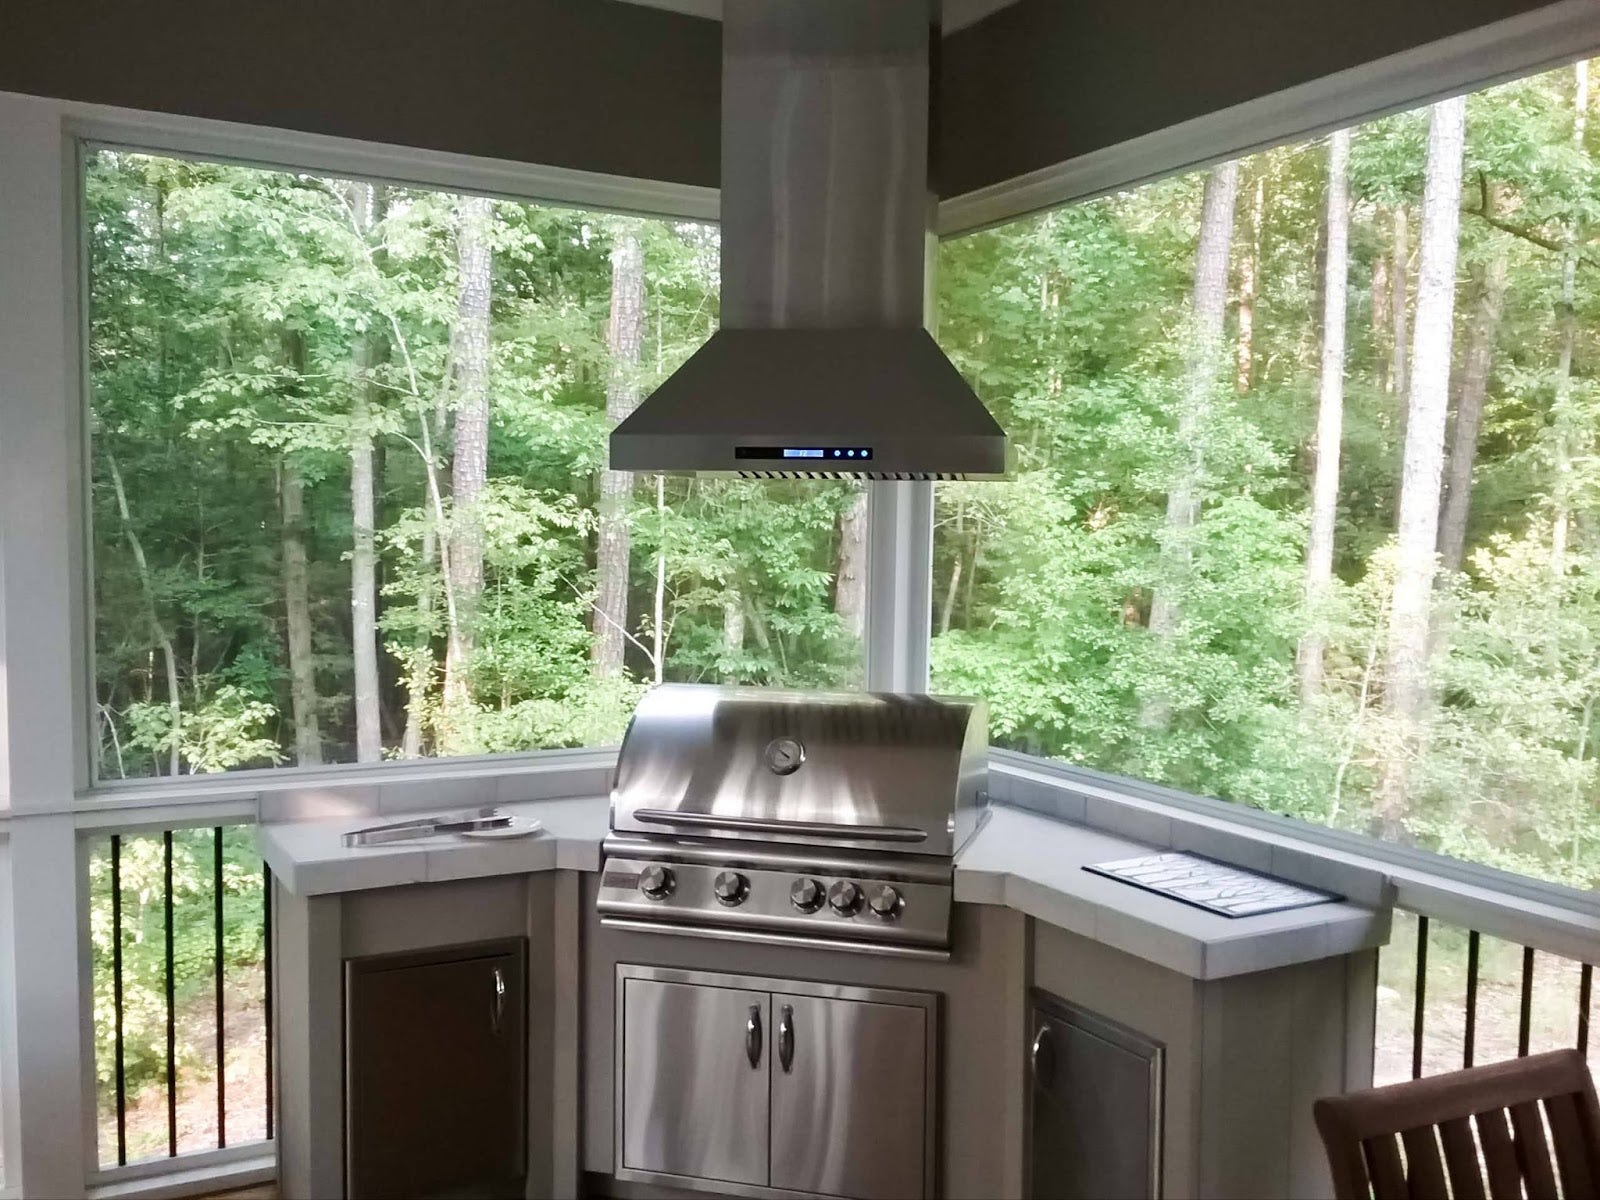 Forest-view kitchen on an enclosed patio featuring a high-end barbecue grill and sleek vent hood, perfect for nature-inspired dining. - Proline Range Hoods - prolinerangehoods.com 